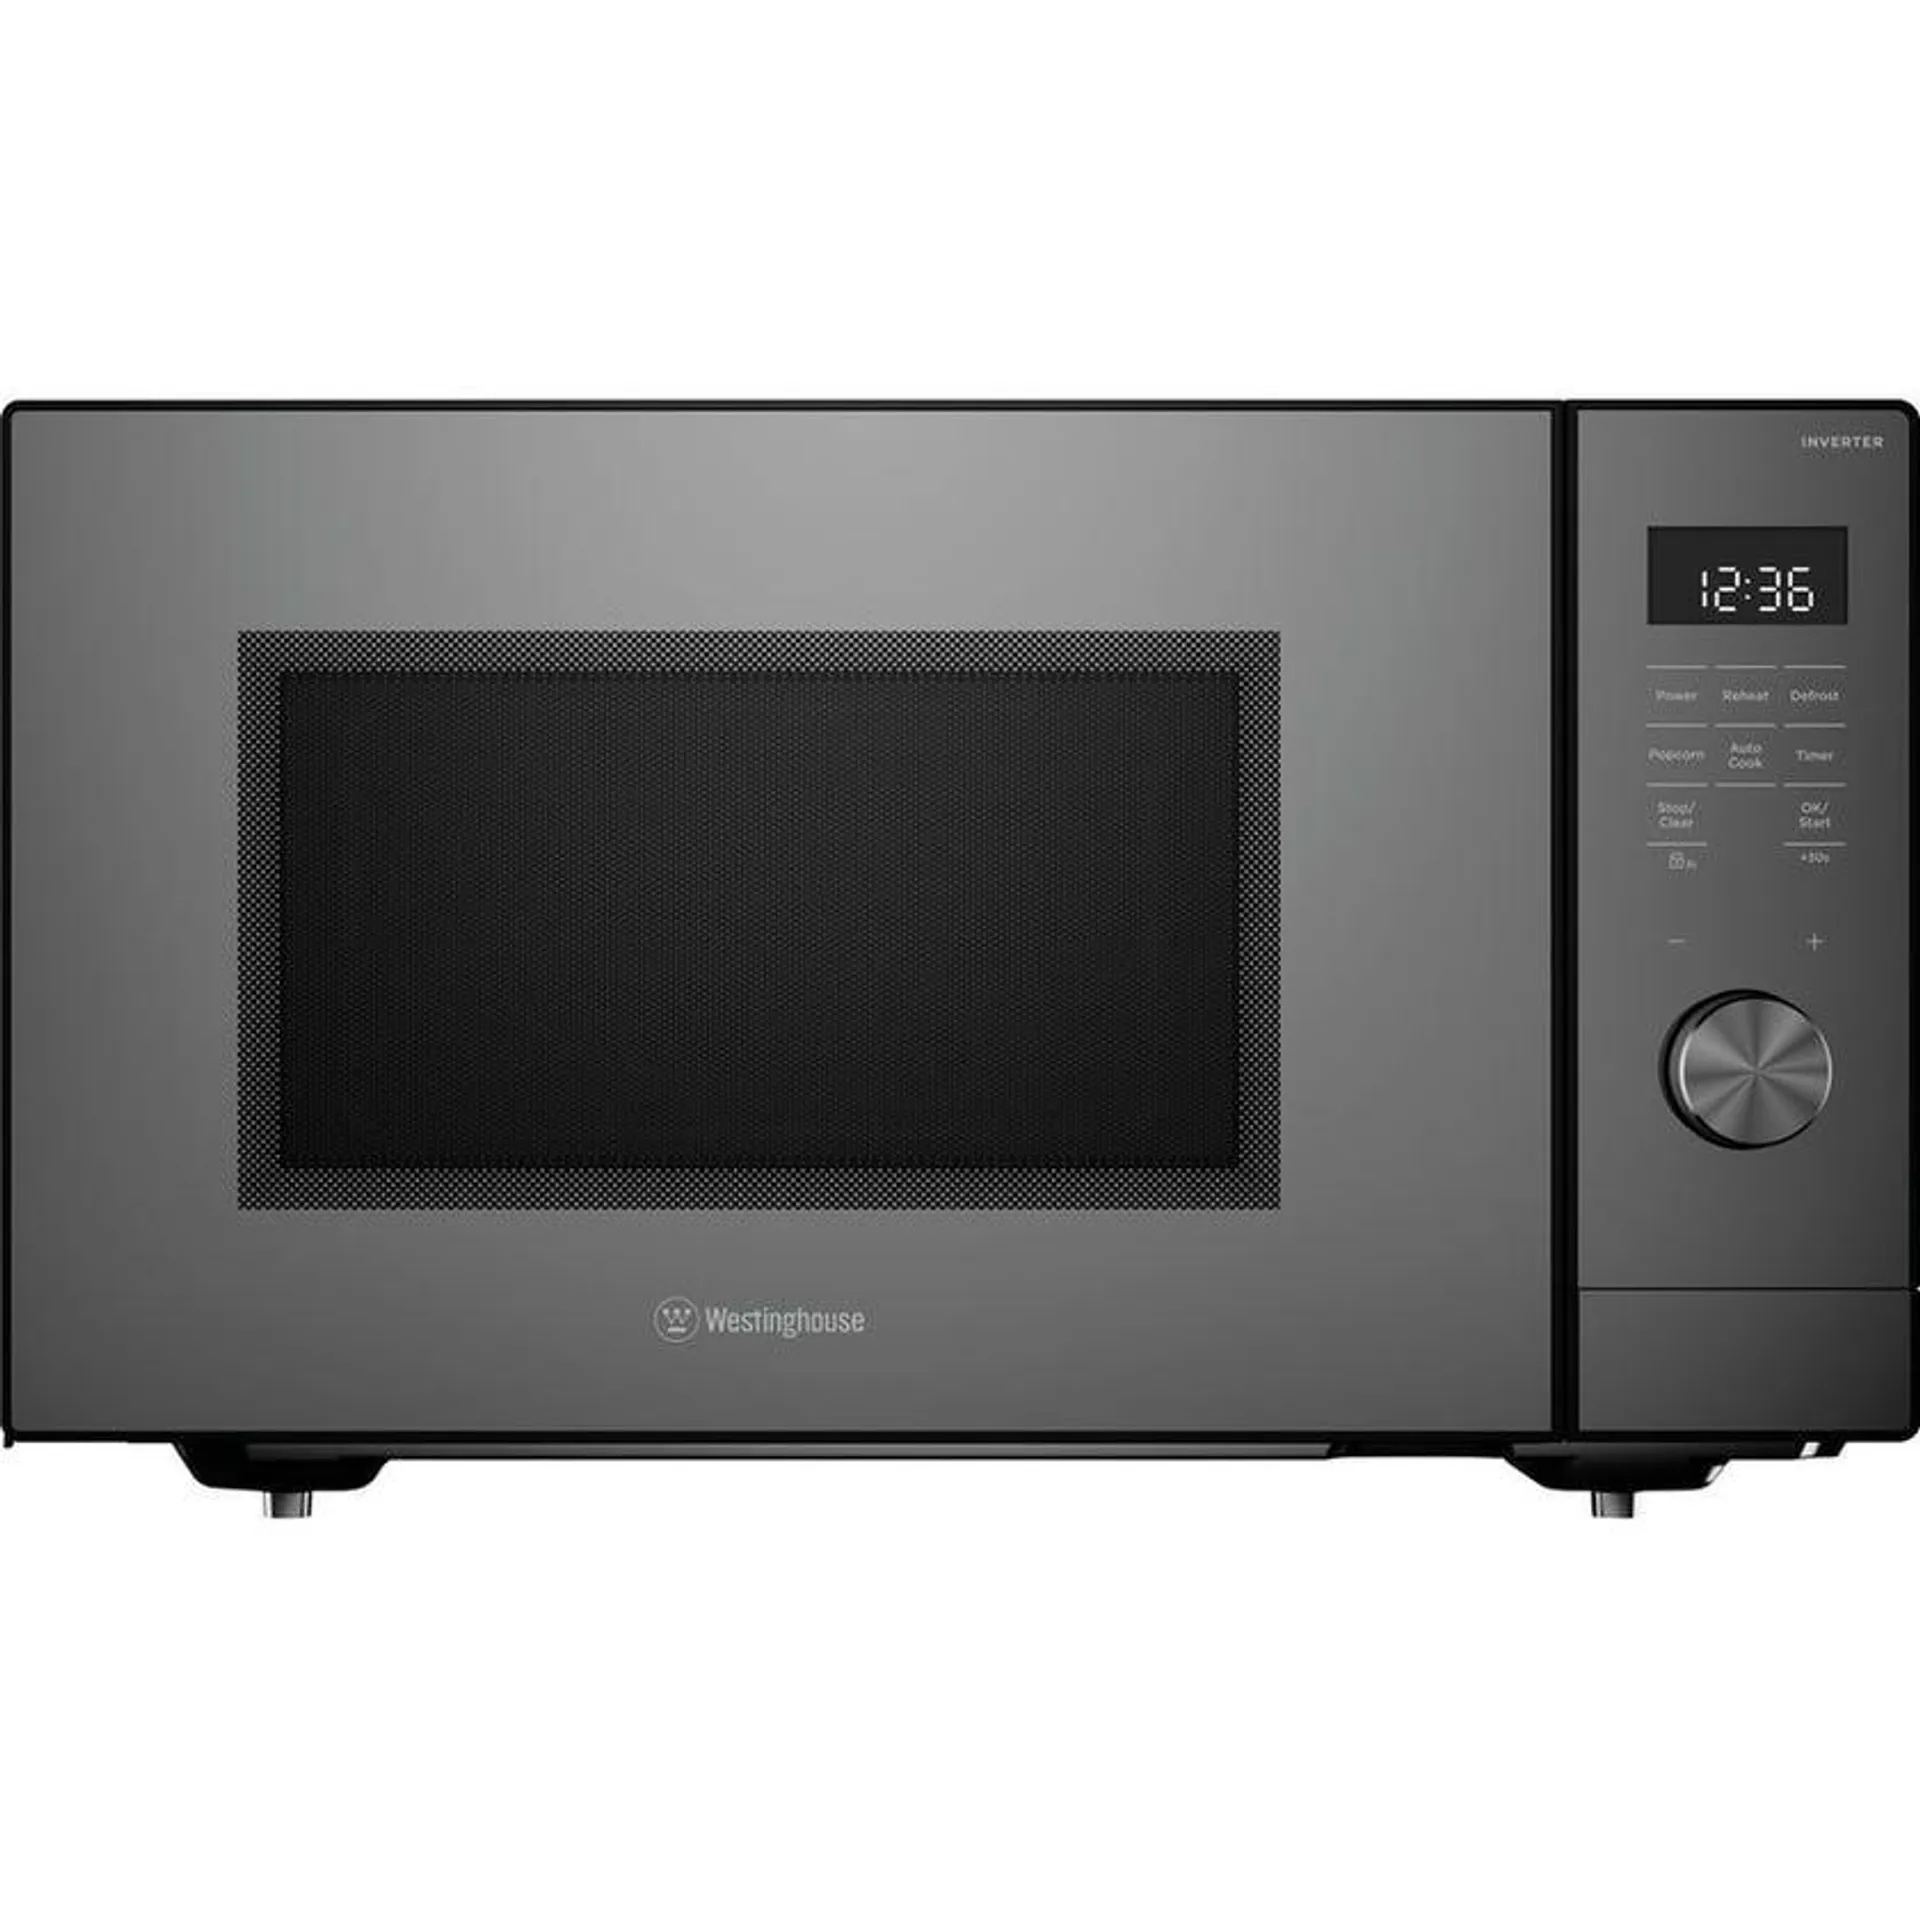 Westinghouse WMF4505GA 45L Charcoal Grey 1100W Microwave Oven